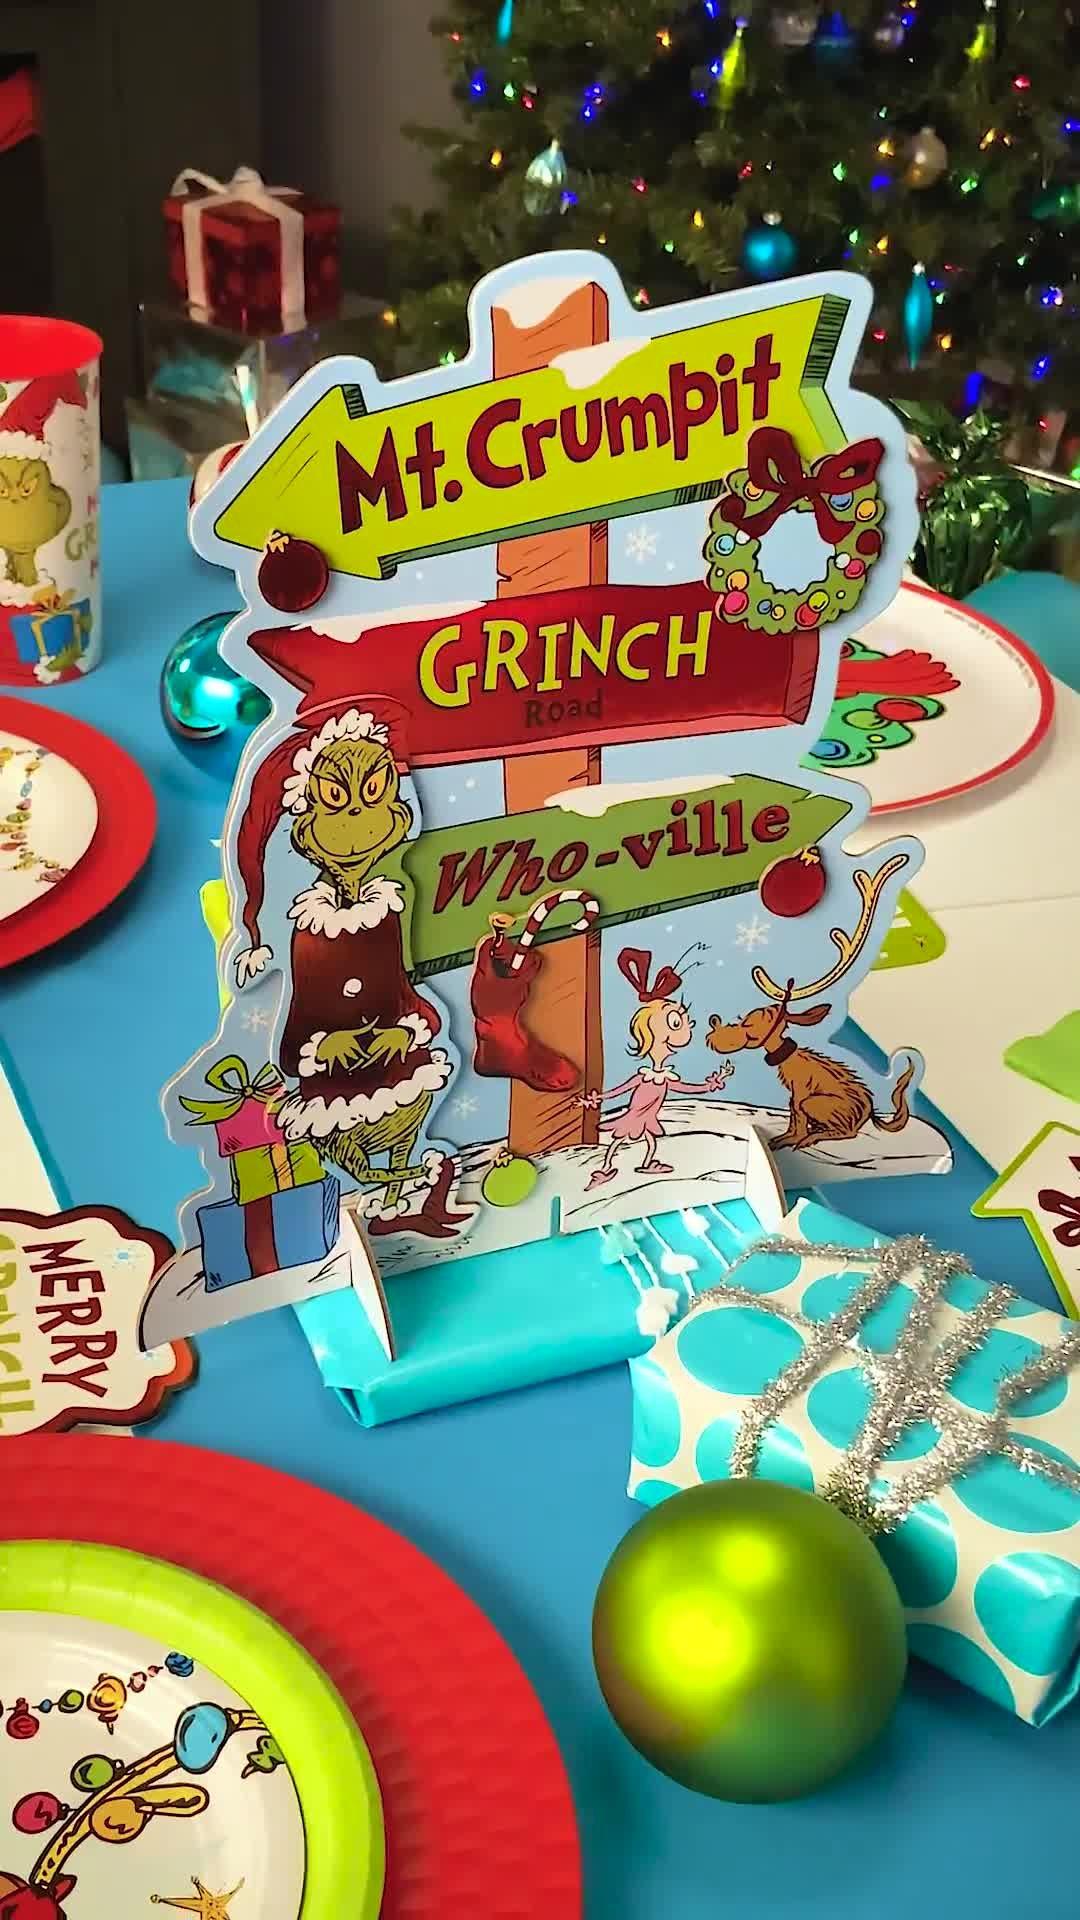 Traditional Grinch Photo Booth Props 13ct